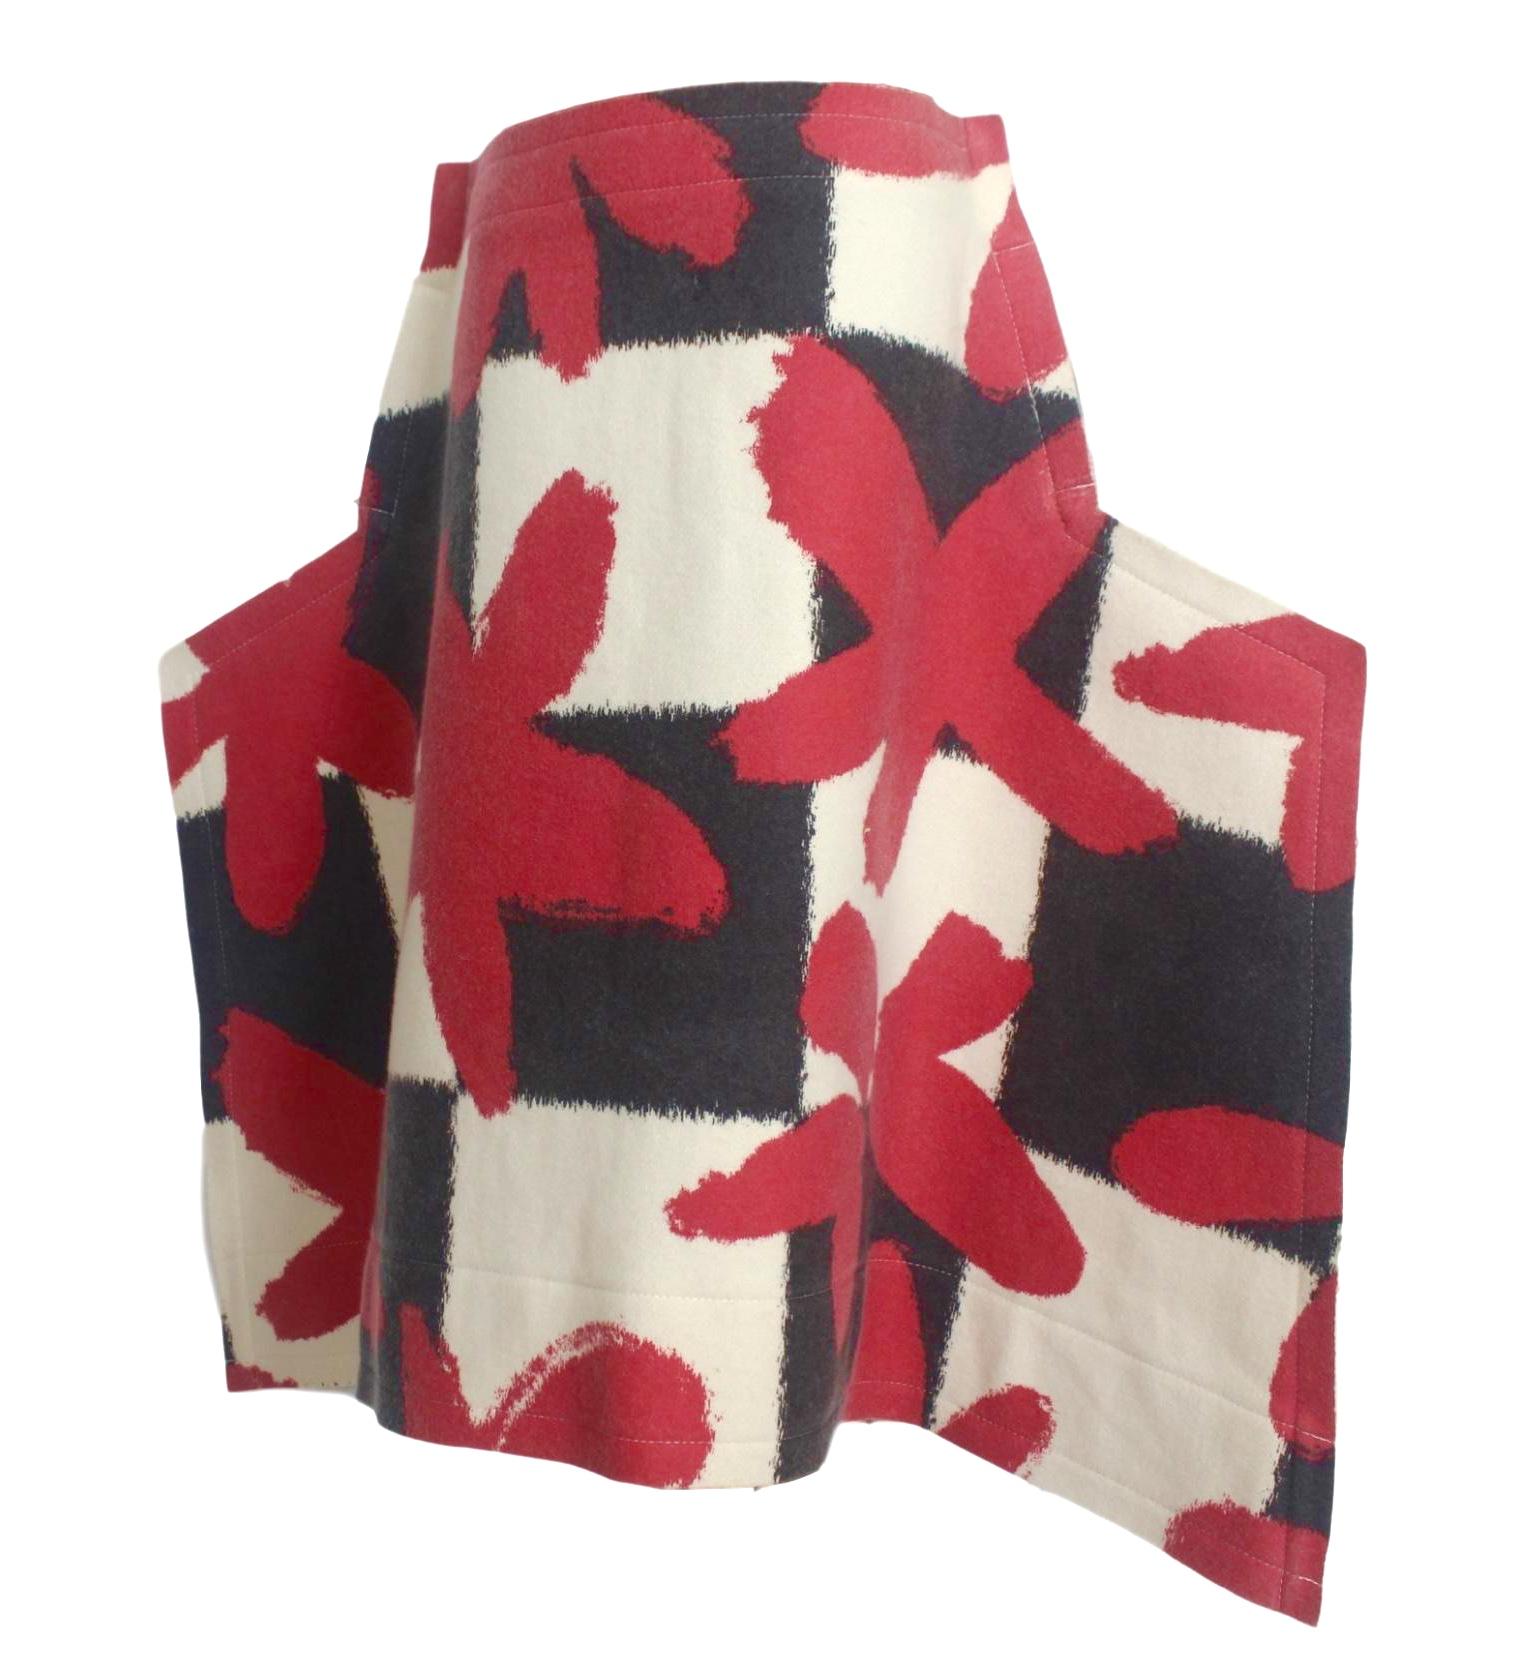 Women's Comme des Garcons 2012 Collection Flat Pack Skirt